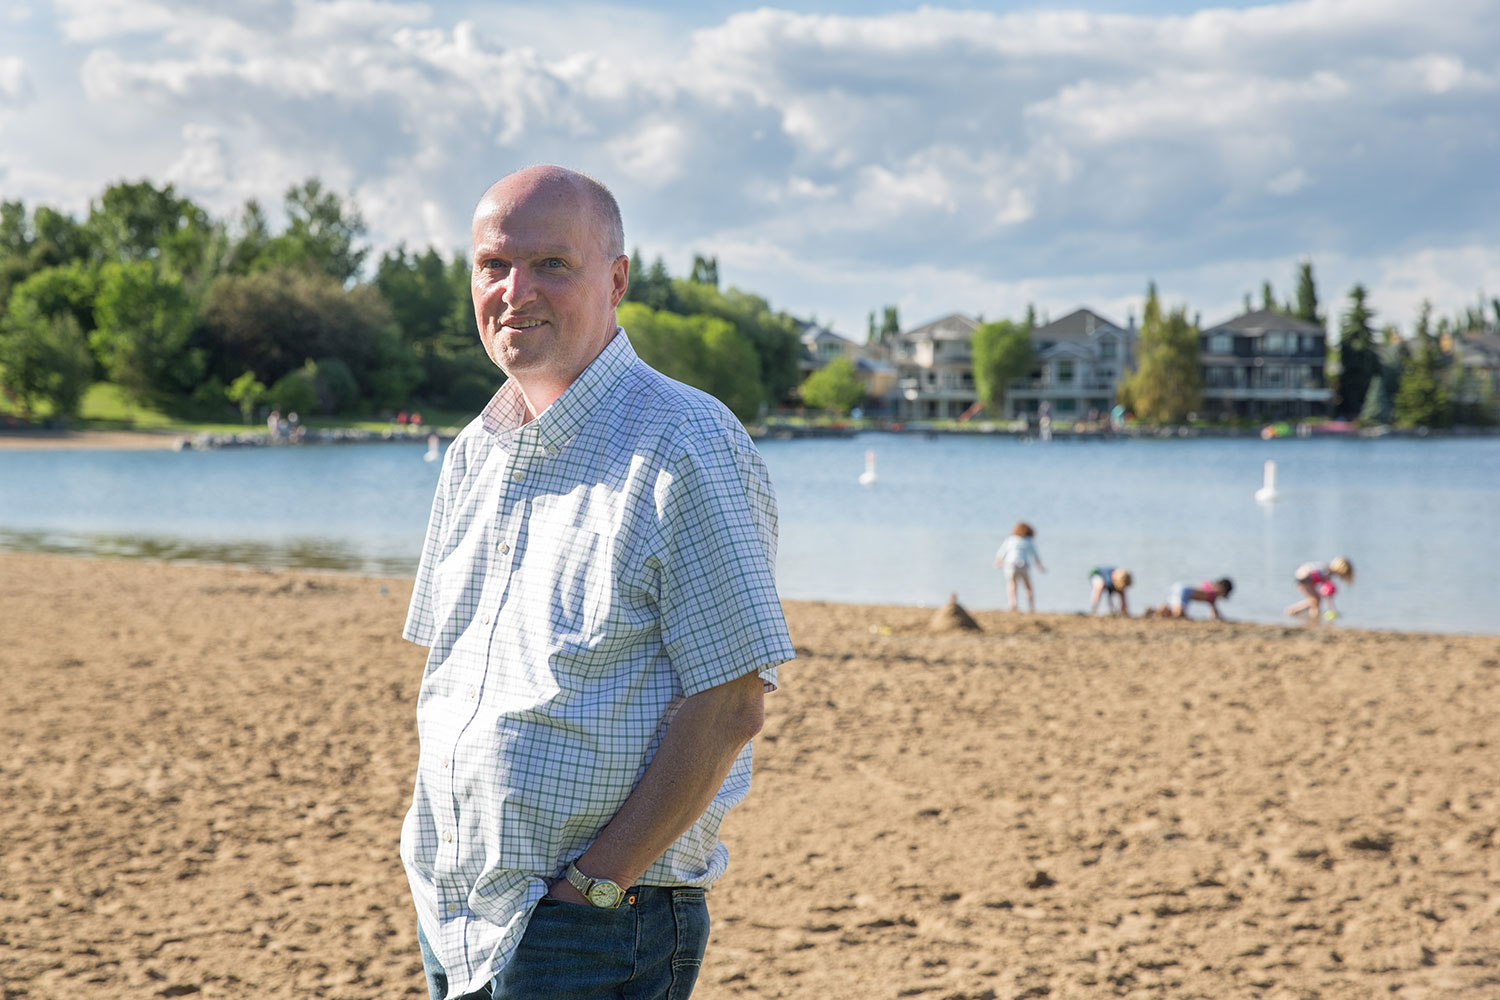 D’Arcy Duquette has lived in McKenzie Lake for 18 years, and has been president of the local community association for a decade.
Adrian Shellard / For CREB®Now